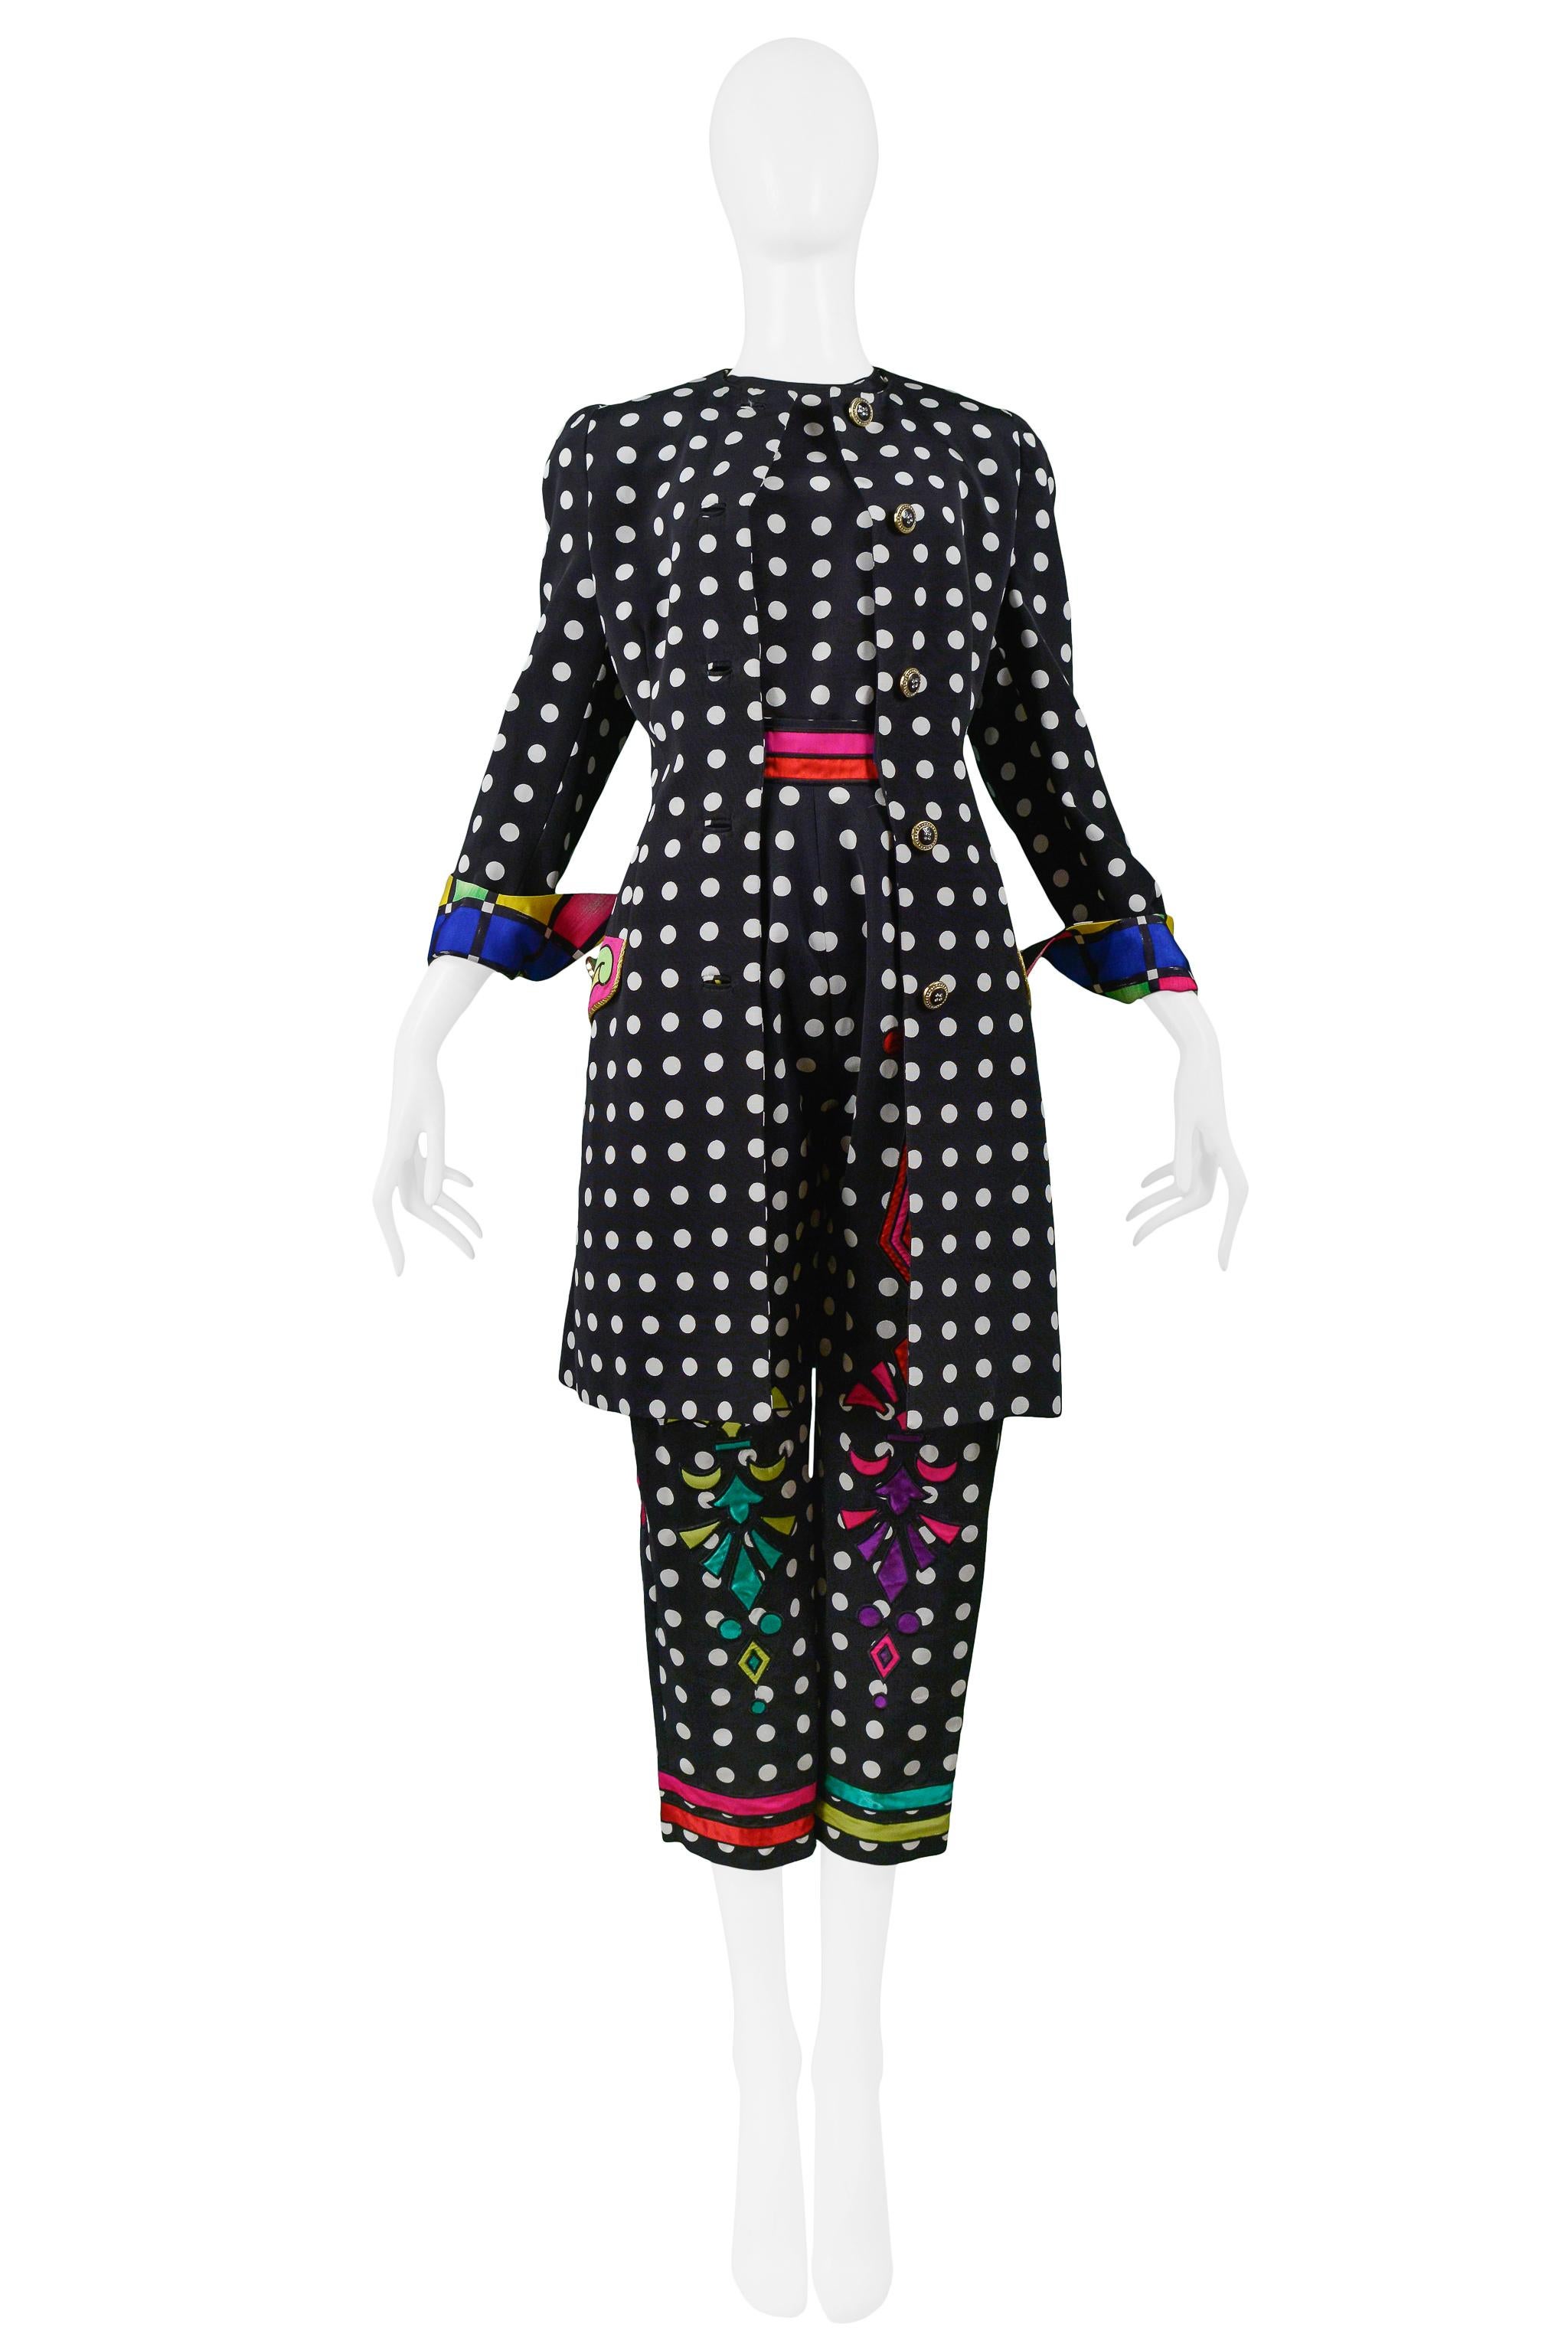 Rare and unusual vintage Gianni Versace black and white dot ensemble featuring a sleeveless top and high-waisted pants with matching coat. The pants and coat feature multicolor stripes and patterns on the waist, pant legs, and on coat sleeve cuffs